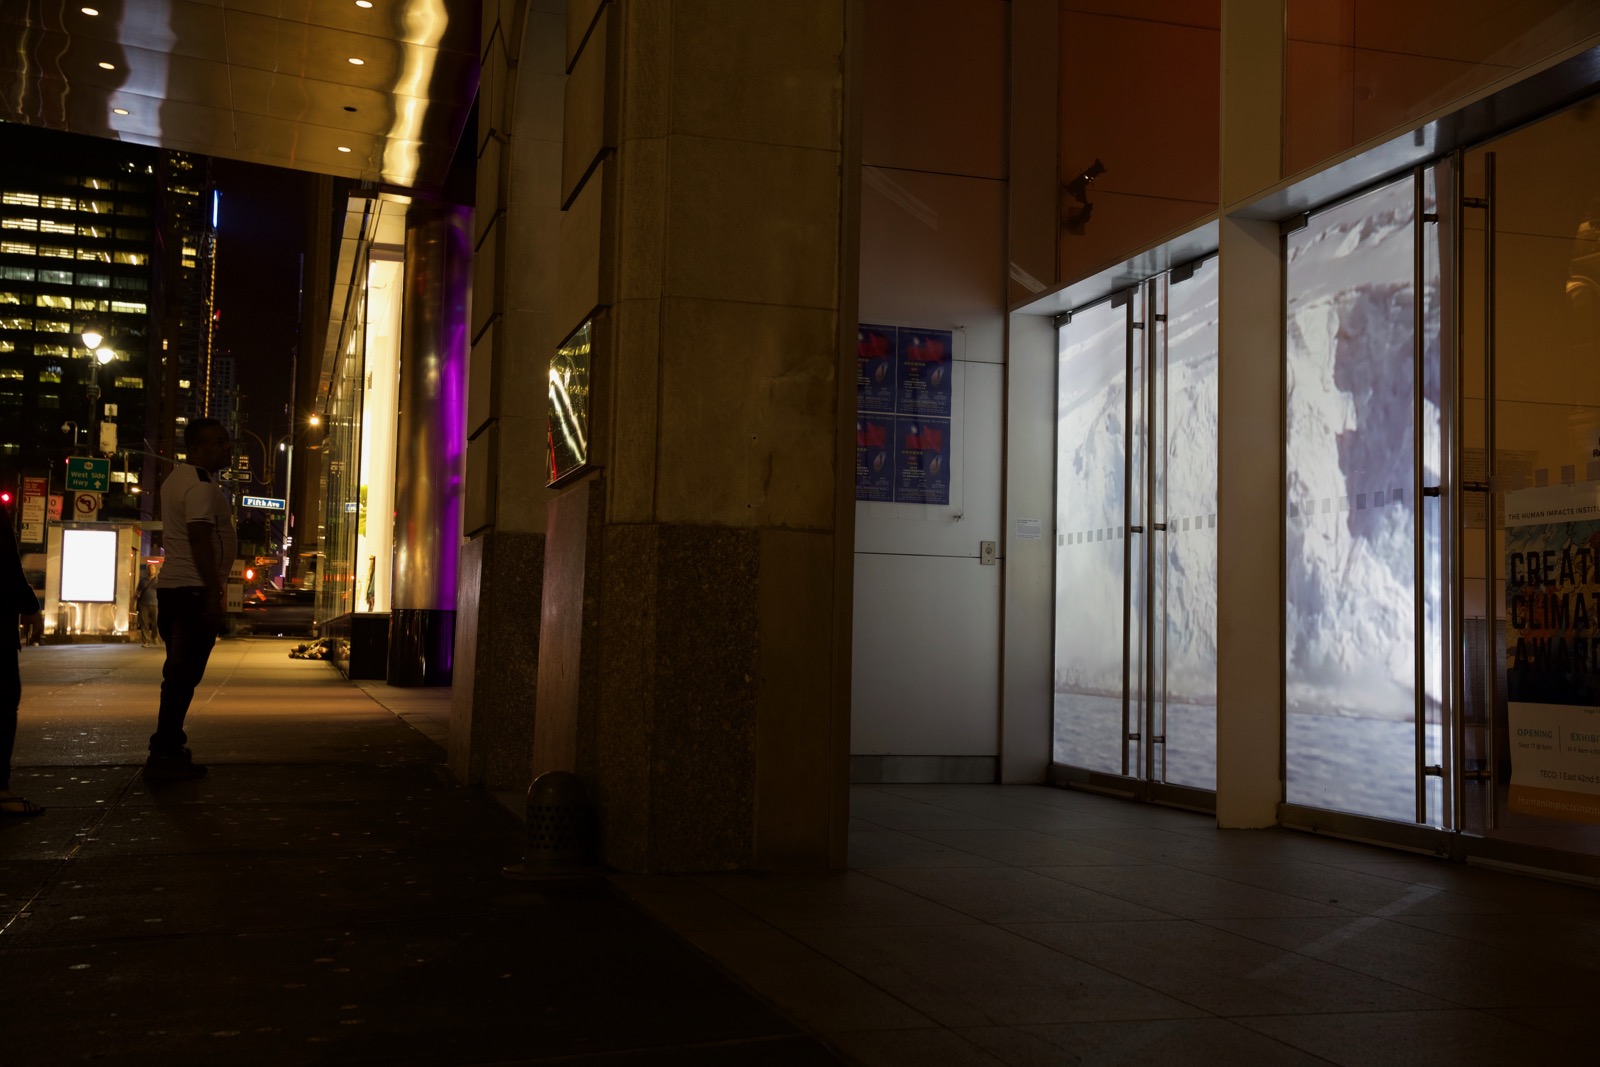 Nighttime photograph of a city street—a street sign in the far background says 'Fifth Avenue.' On the left side is a passerby who has stopped and is looking at the projection of an arctic scene (glaciers) in the windows of the building on the right.